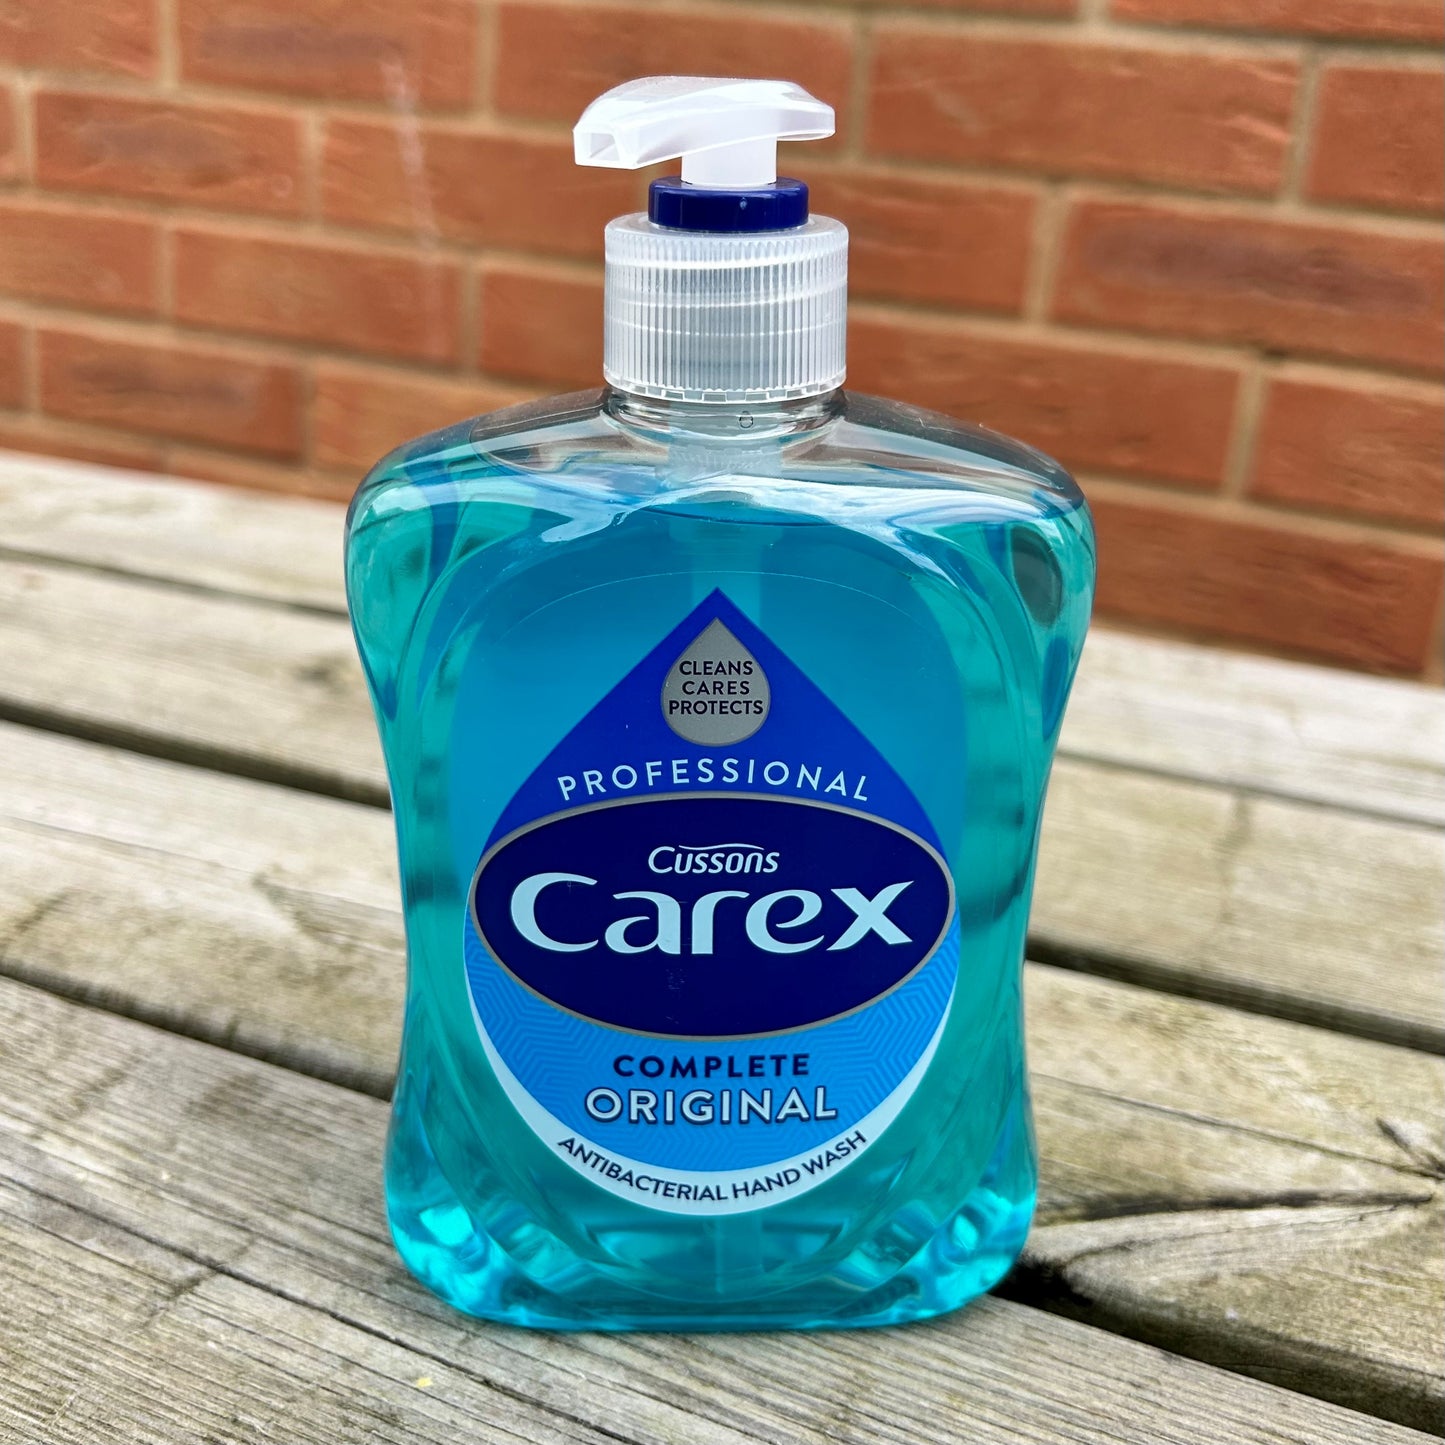 Carex liquid soap in a 500ml pump action container